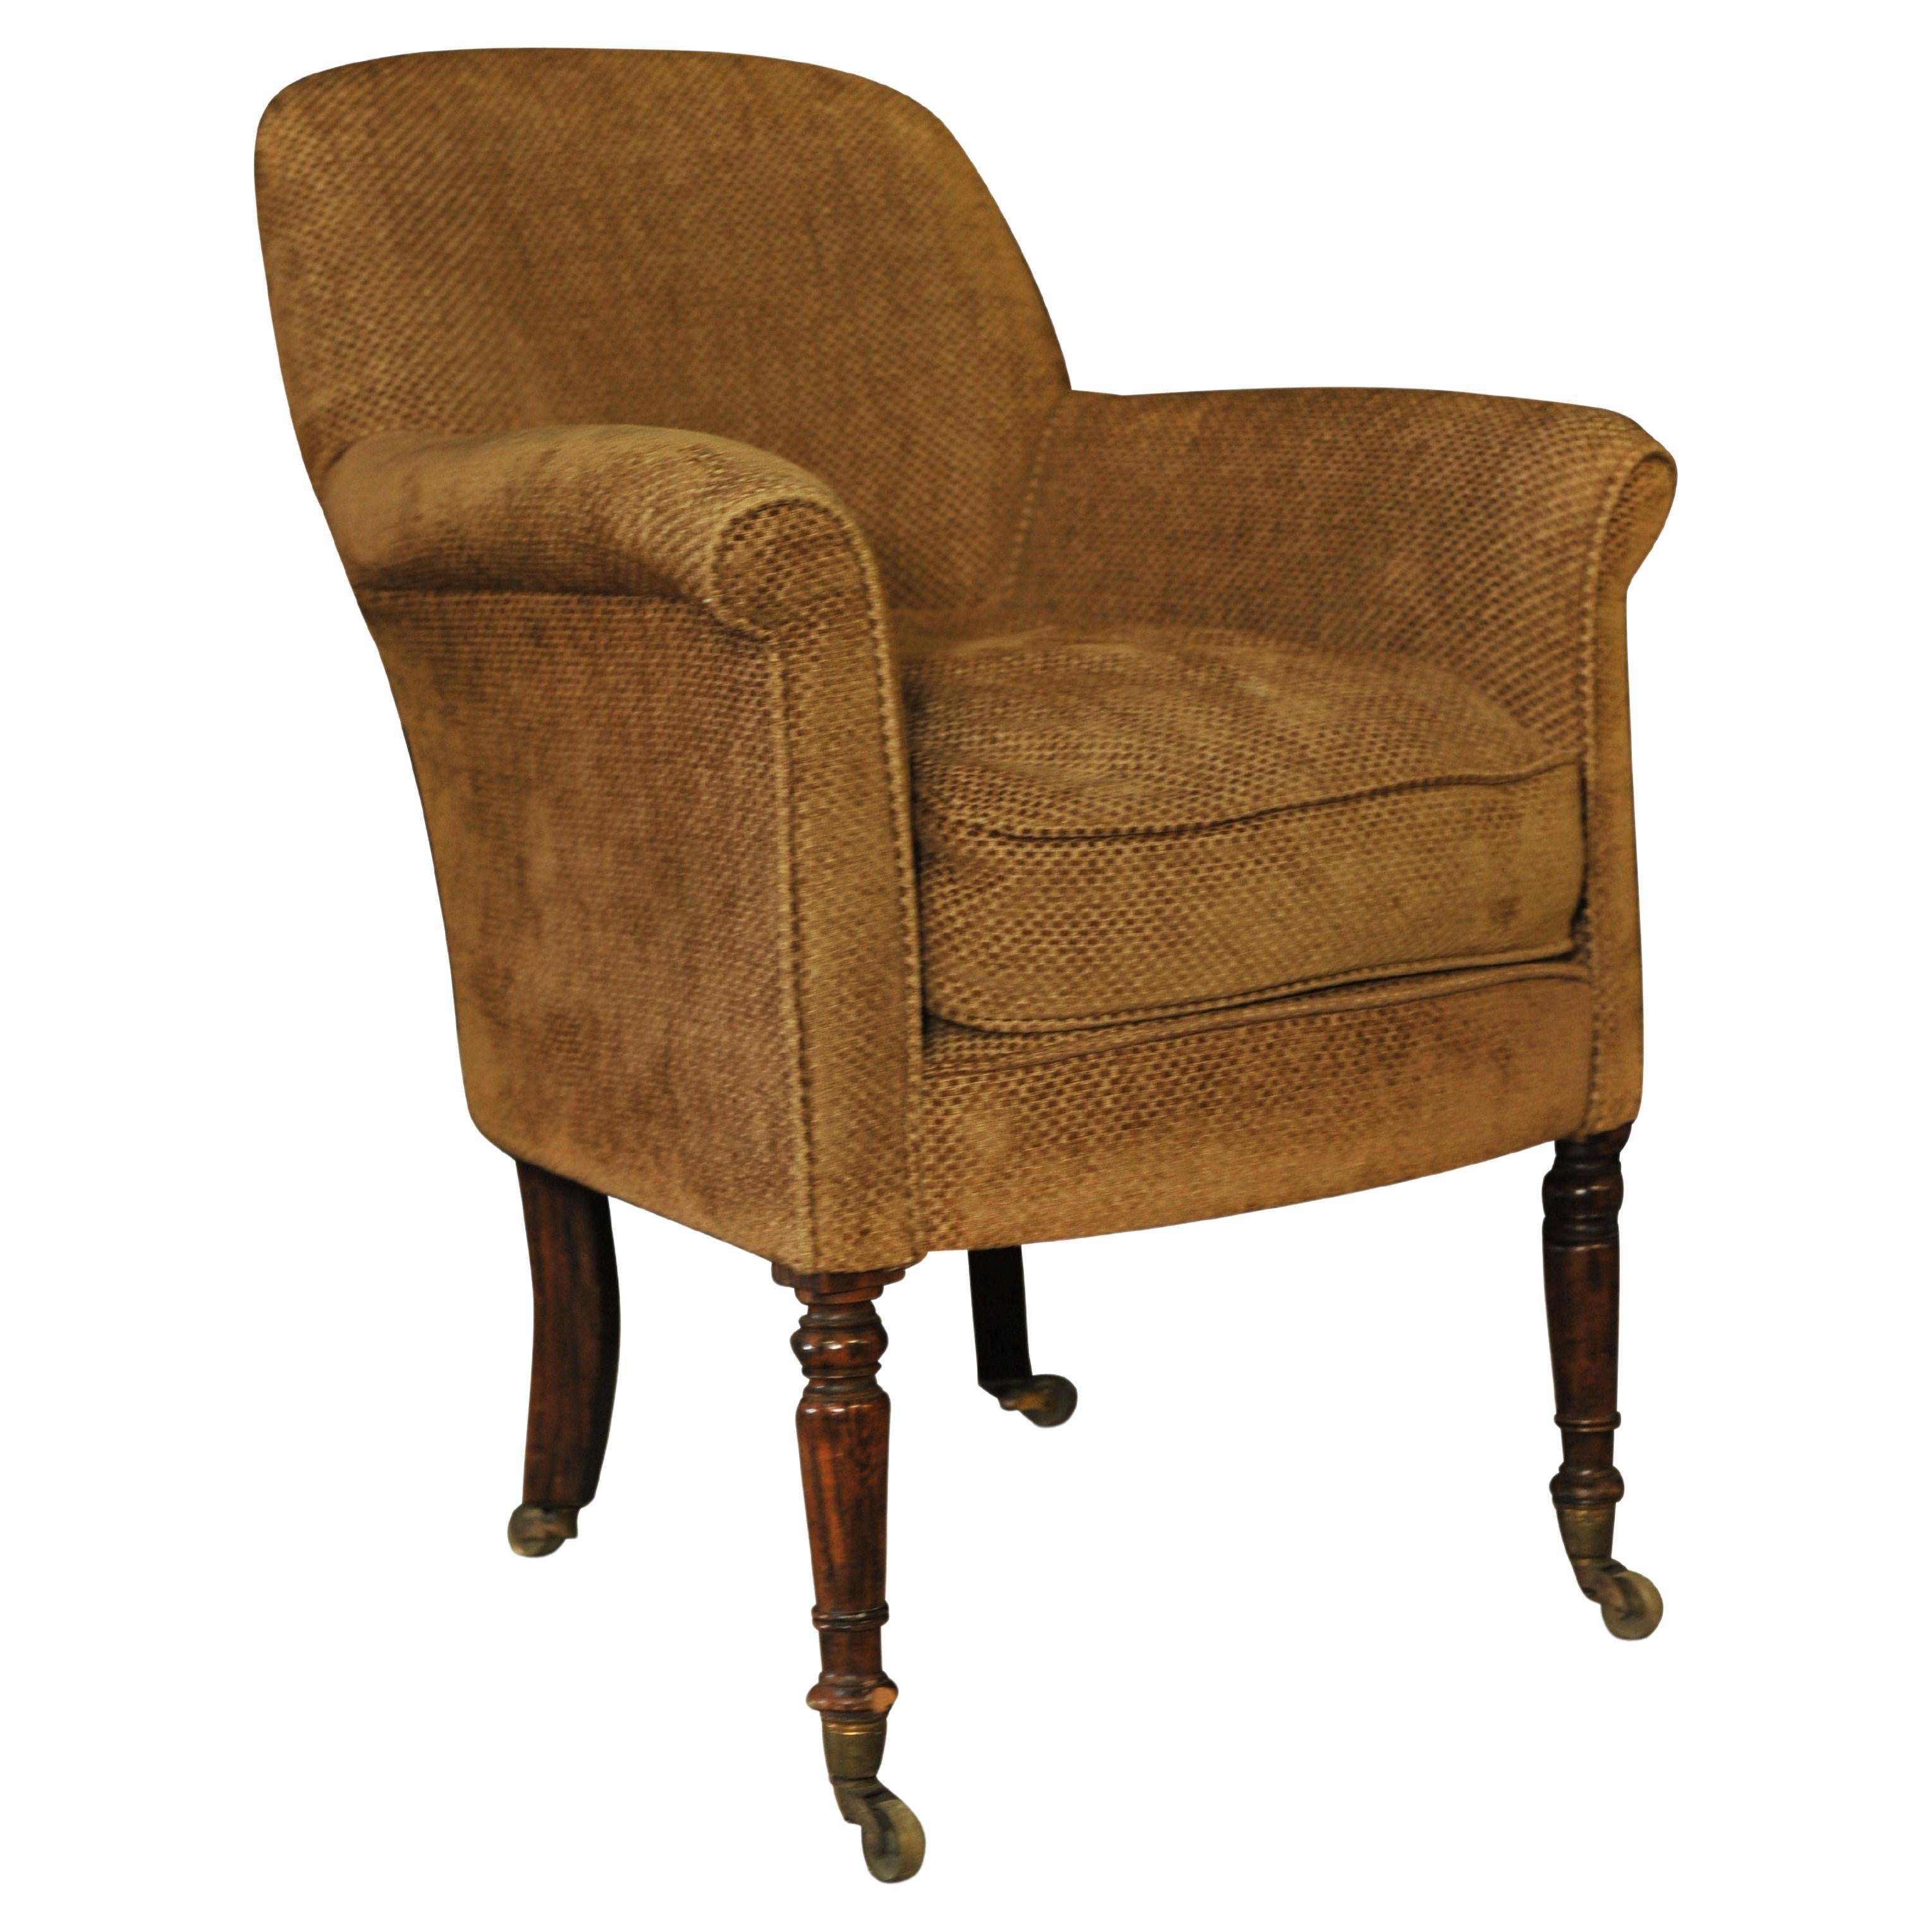 19th Century William IV Tub Chair On Brass Castors, Sabre Legs & Chenille Finish For Sale